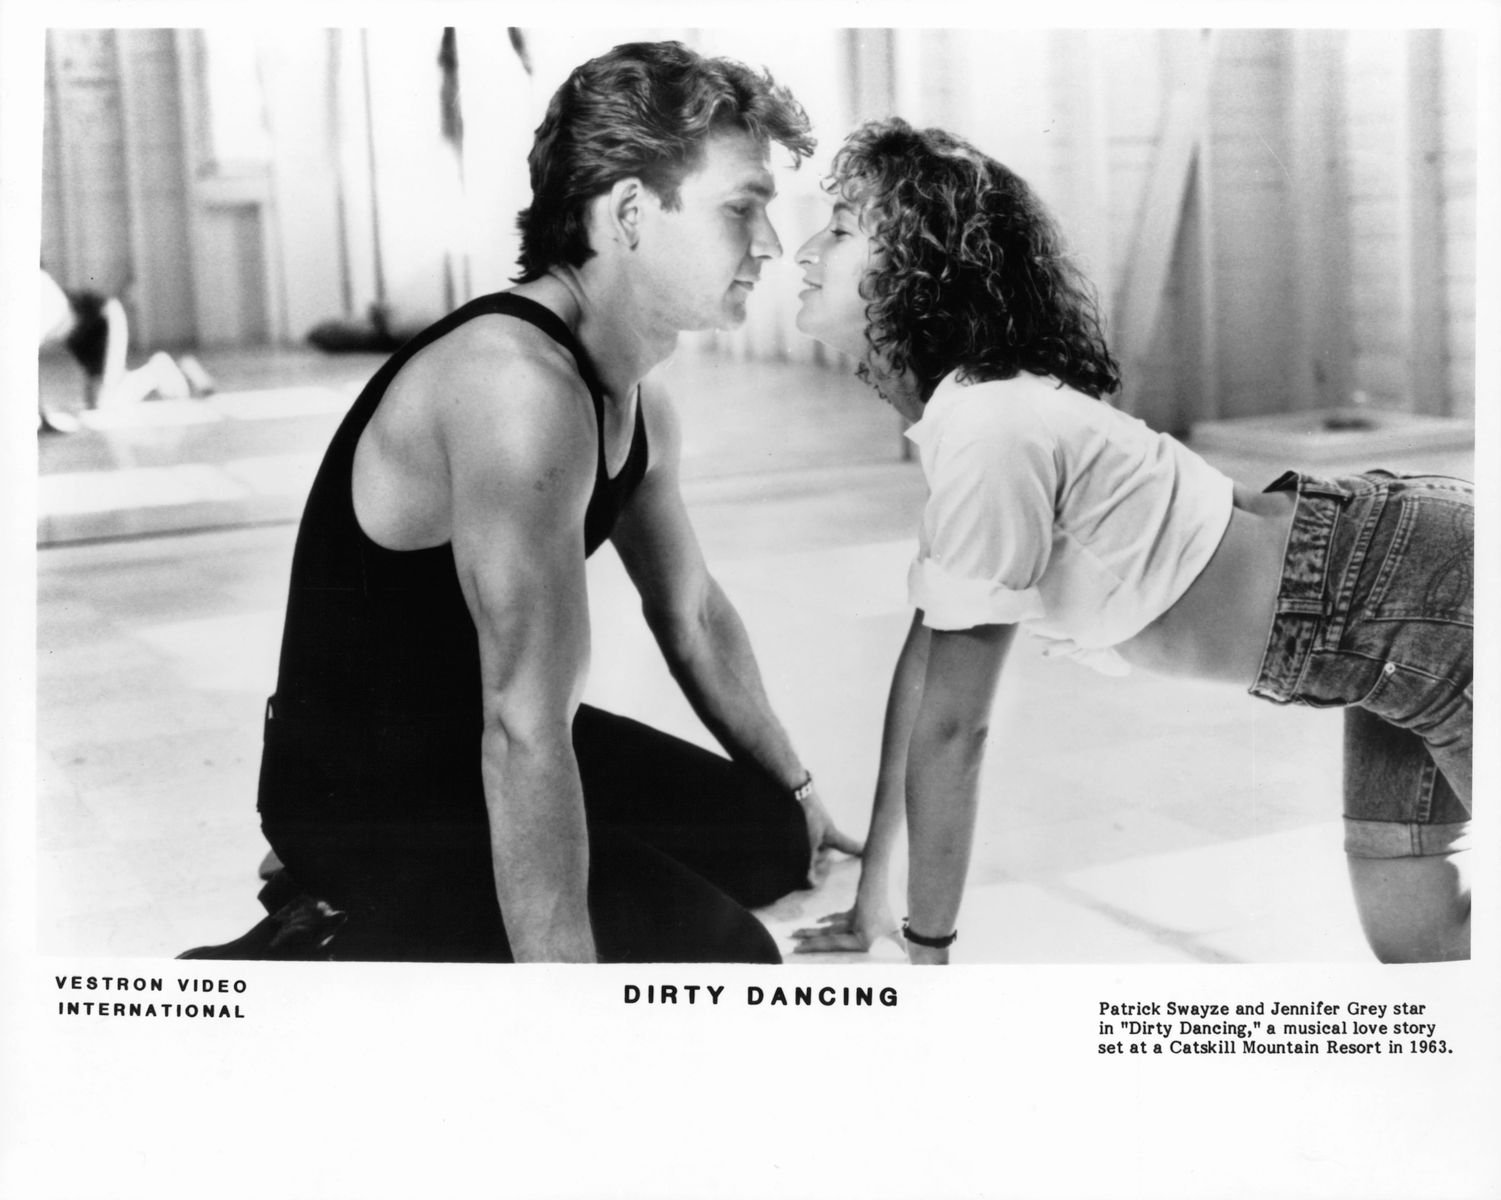 Patrick Swayze and Jennifer Grey in a scene from the film 'Dirty Dancing', 1987 | Source: Getty Images)